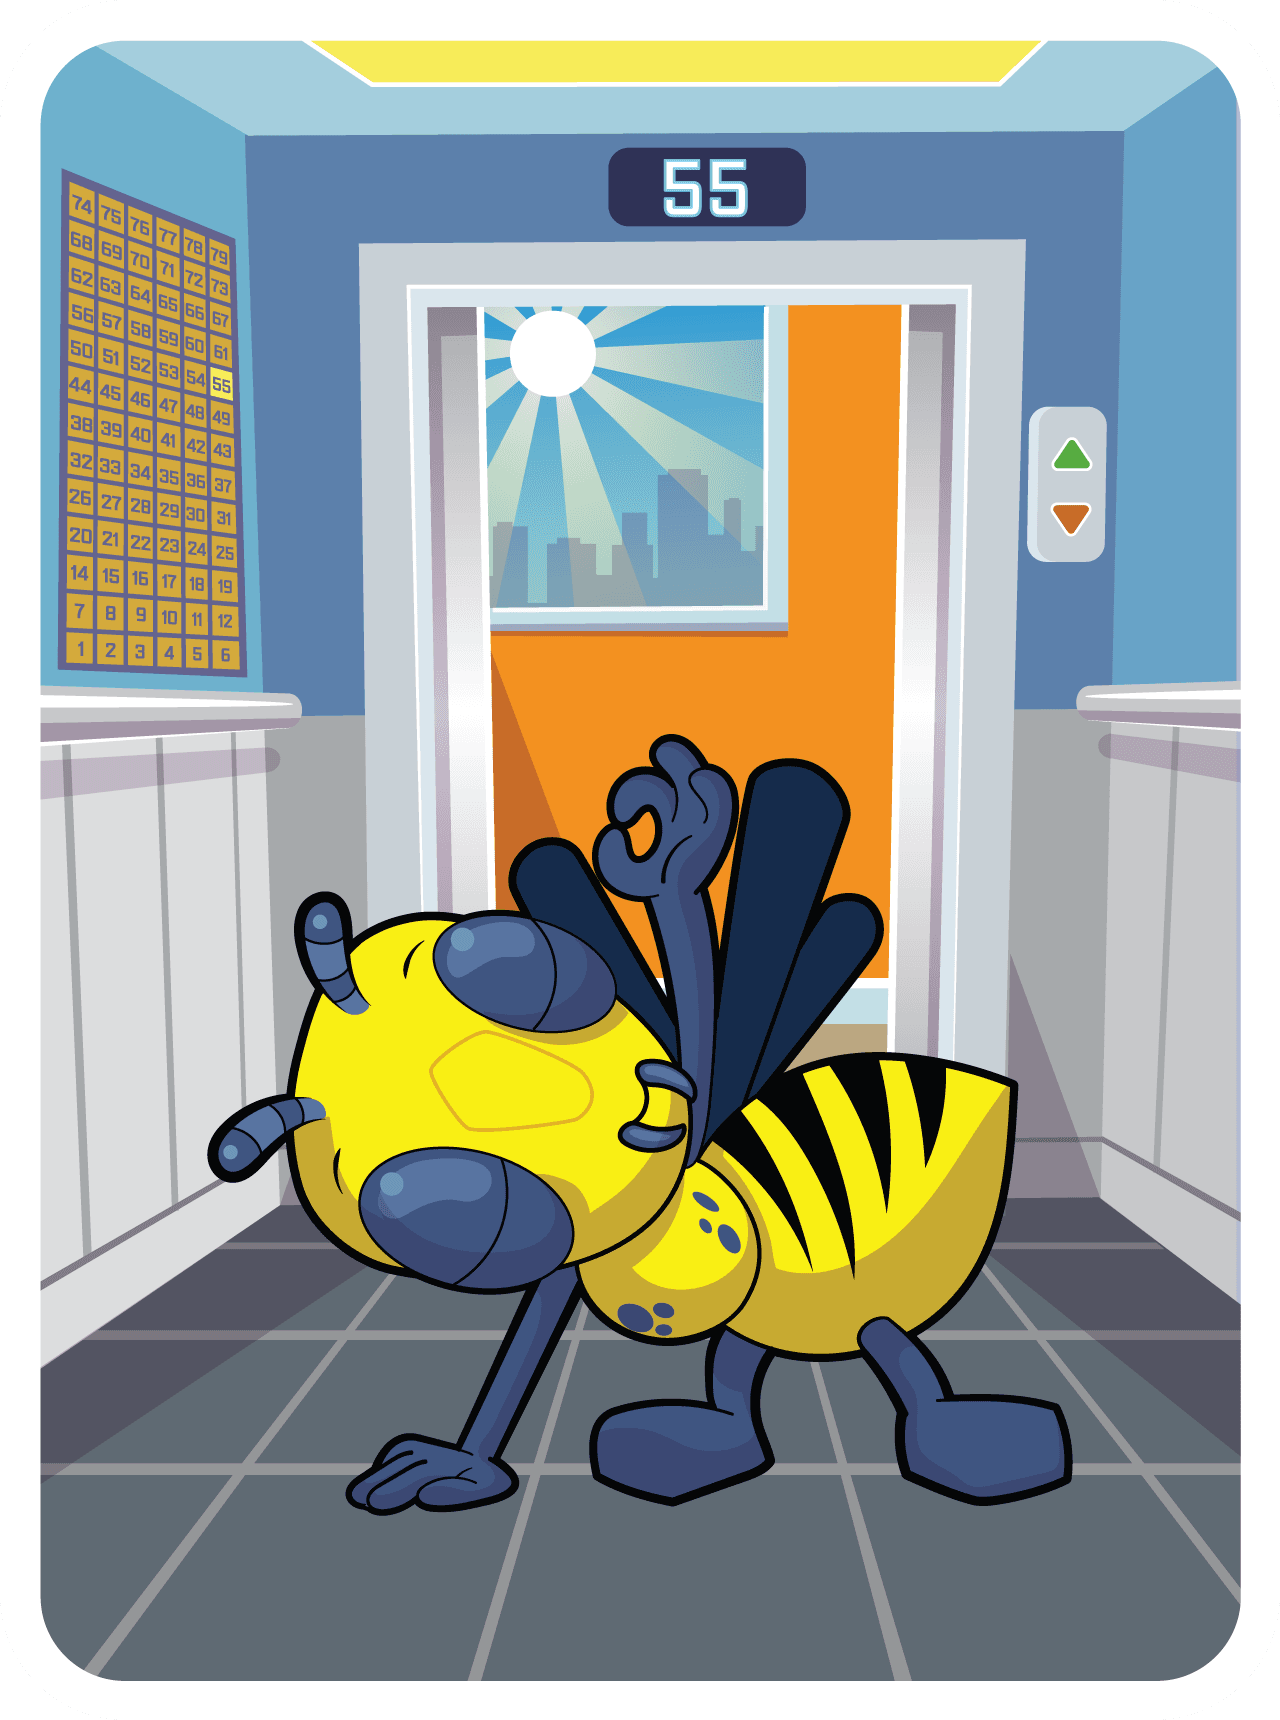 Wise Wasp #33109